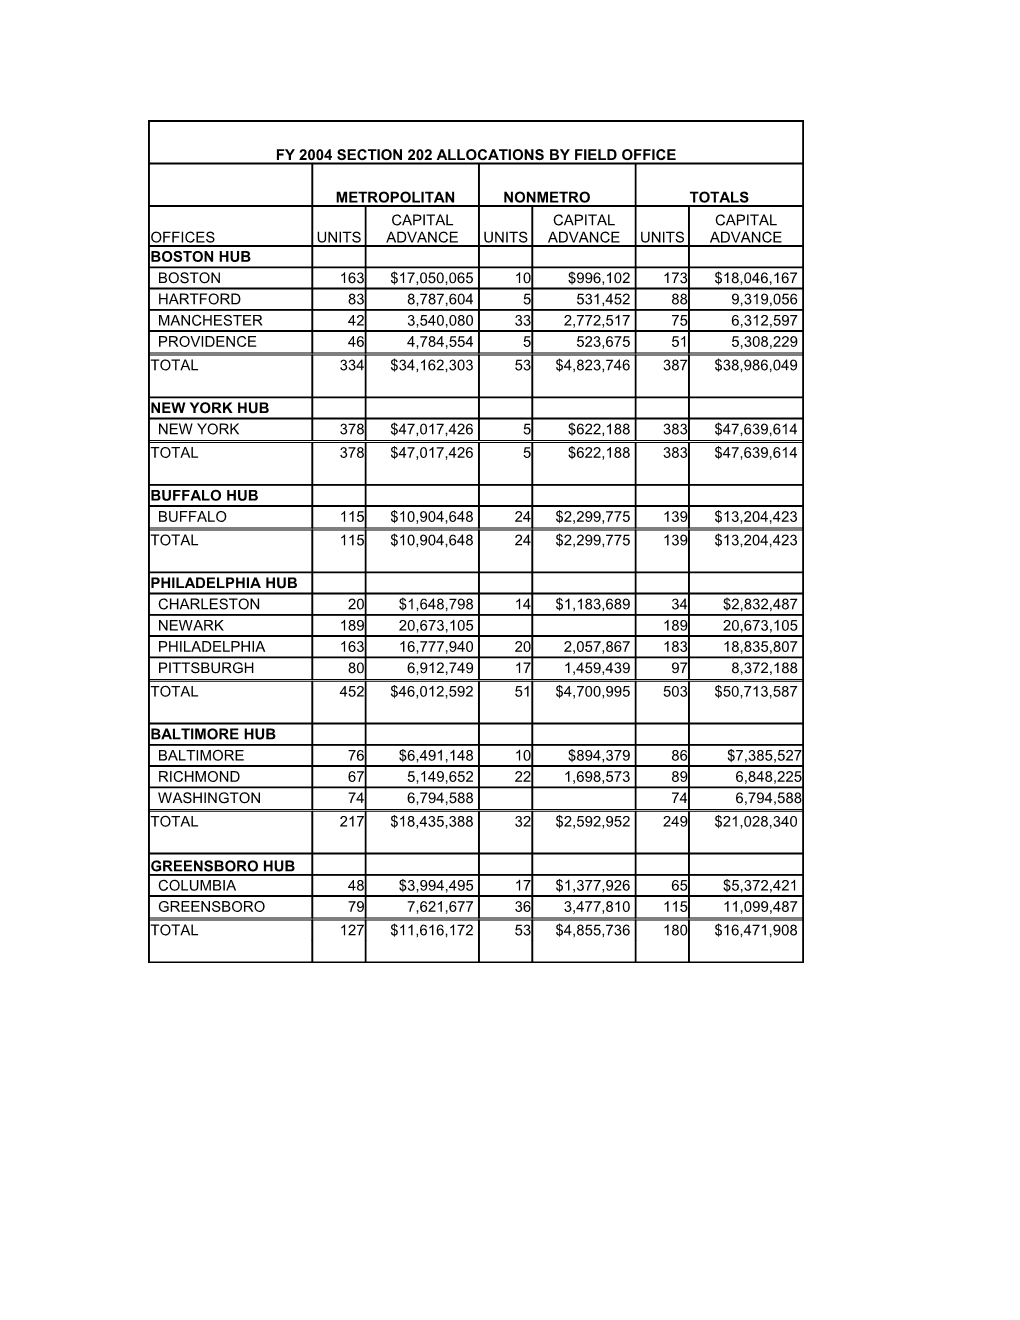 Fy 2004 Section 202 Allocations by Field Office